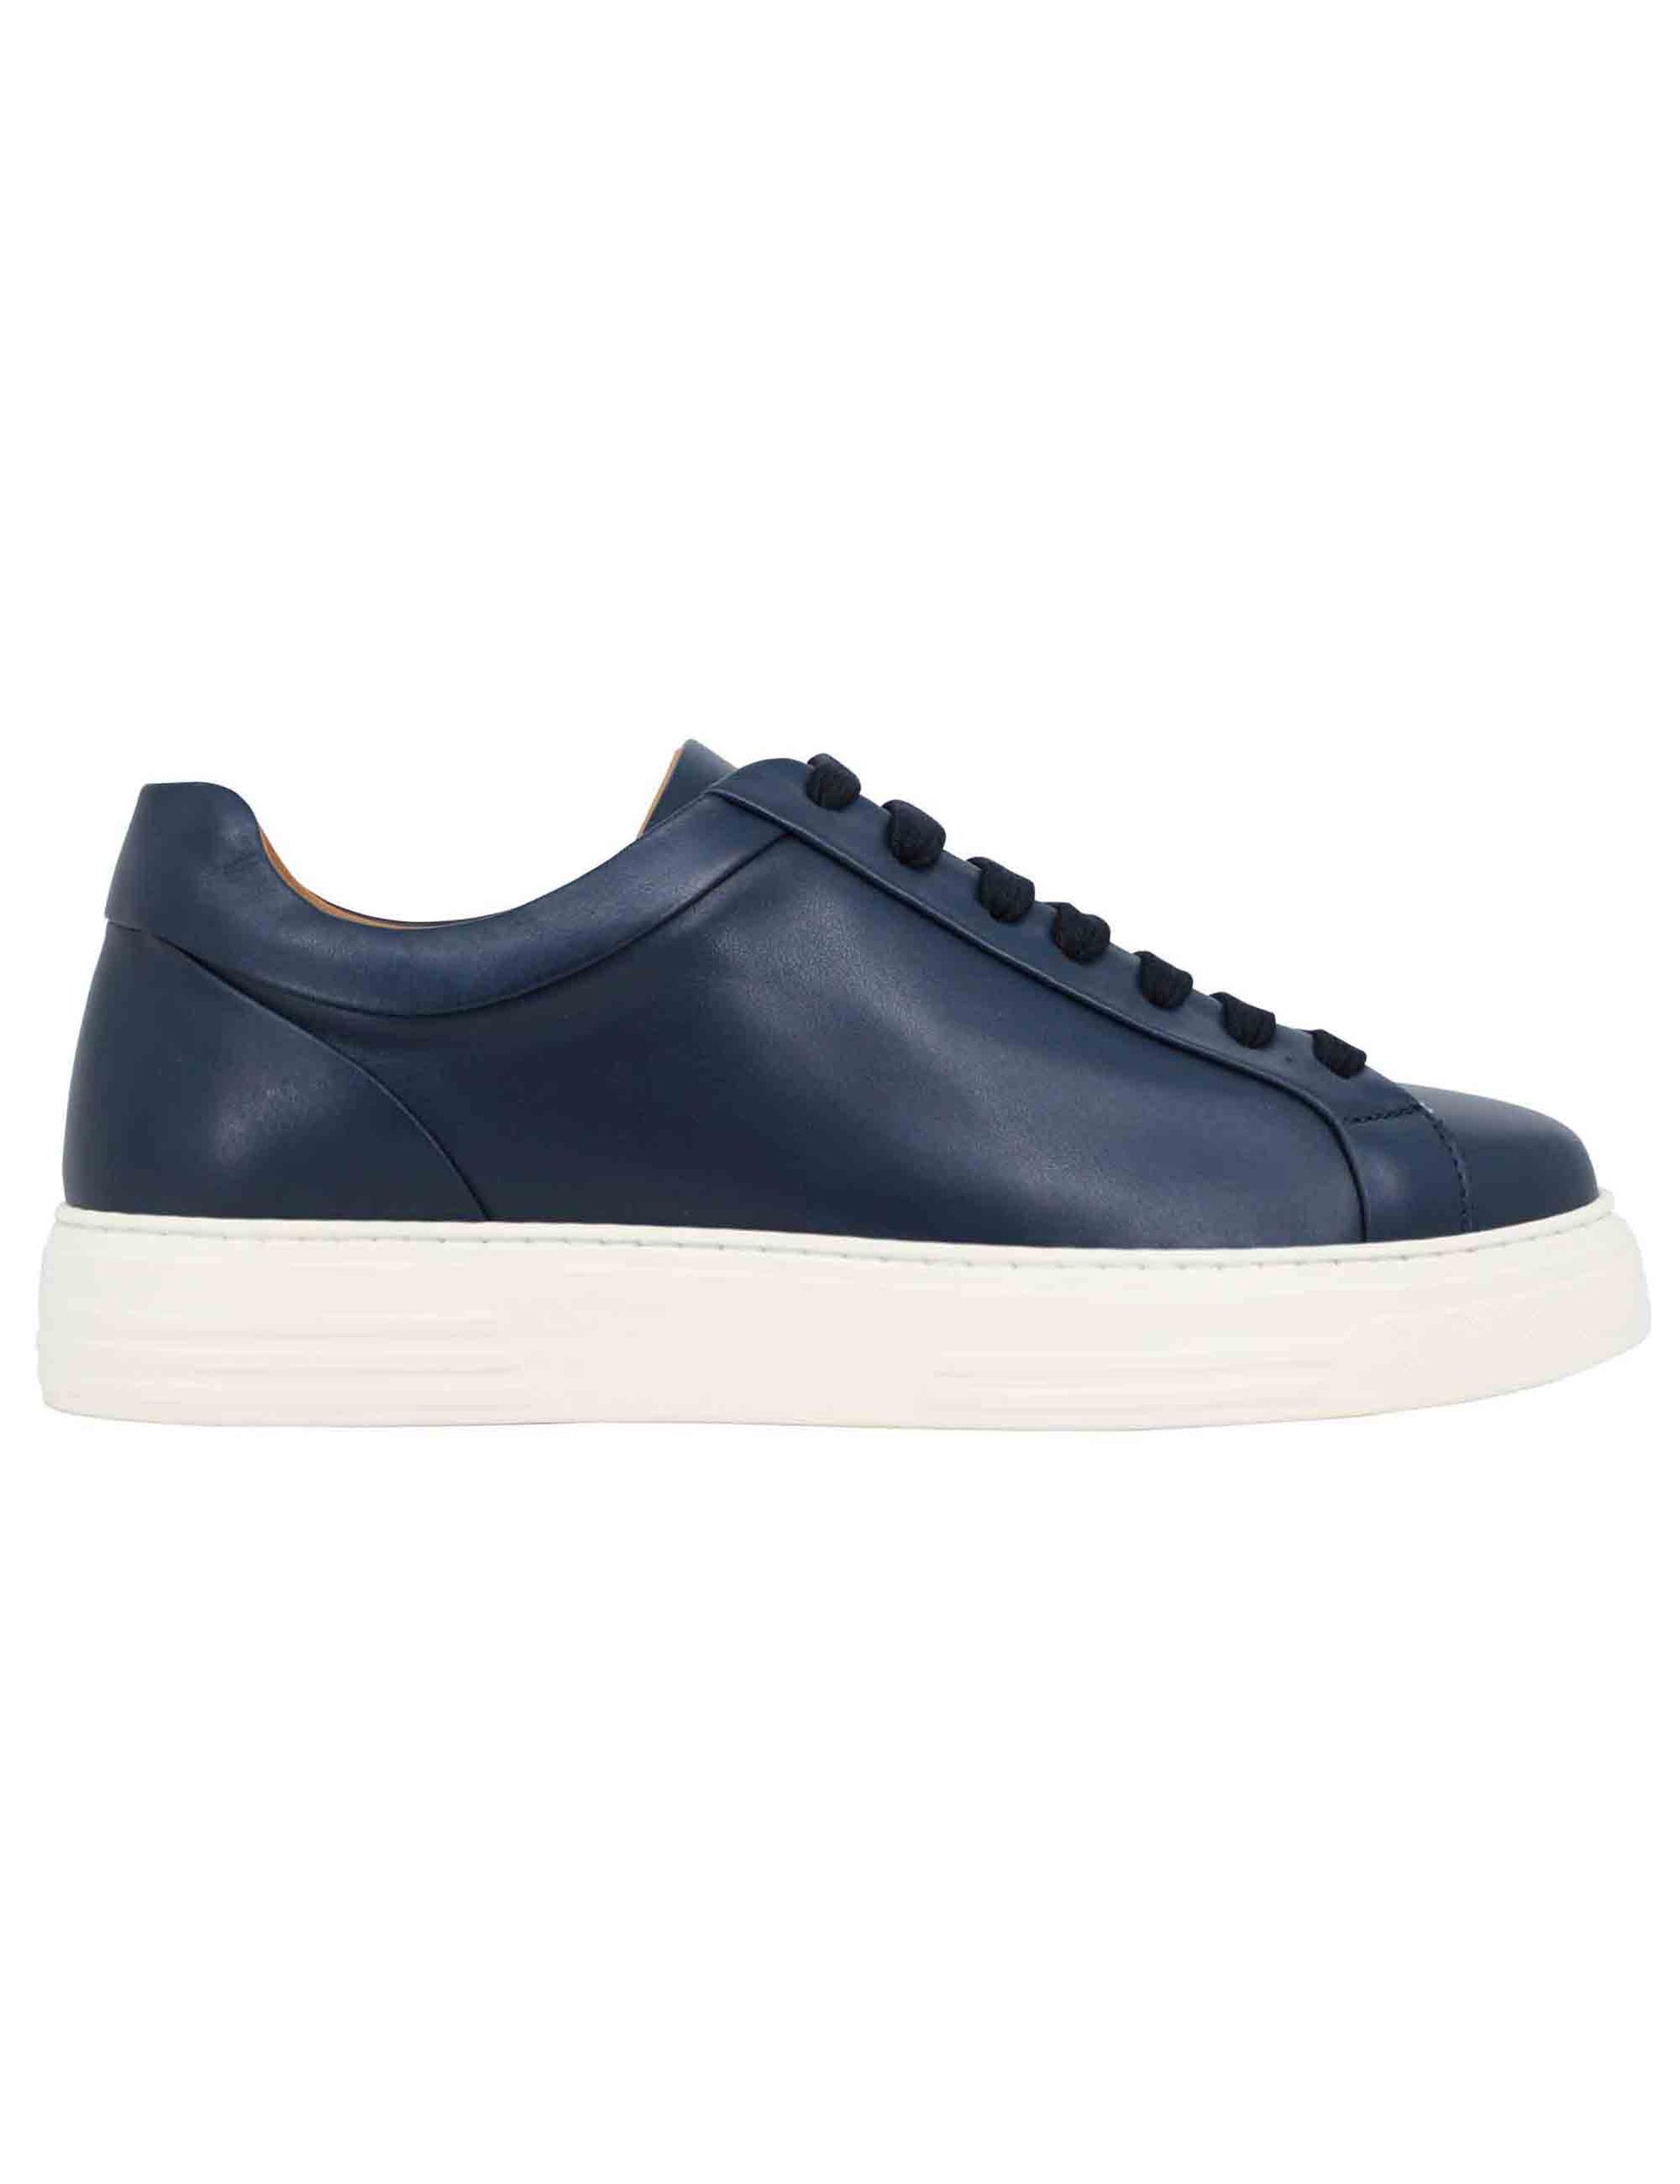 Men's blue leather sneakers with high extra light rubber sole